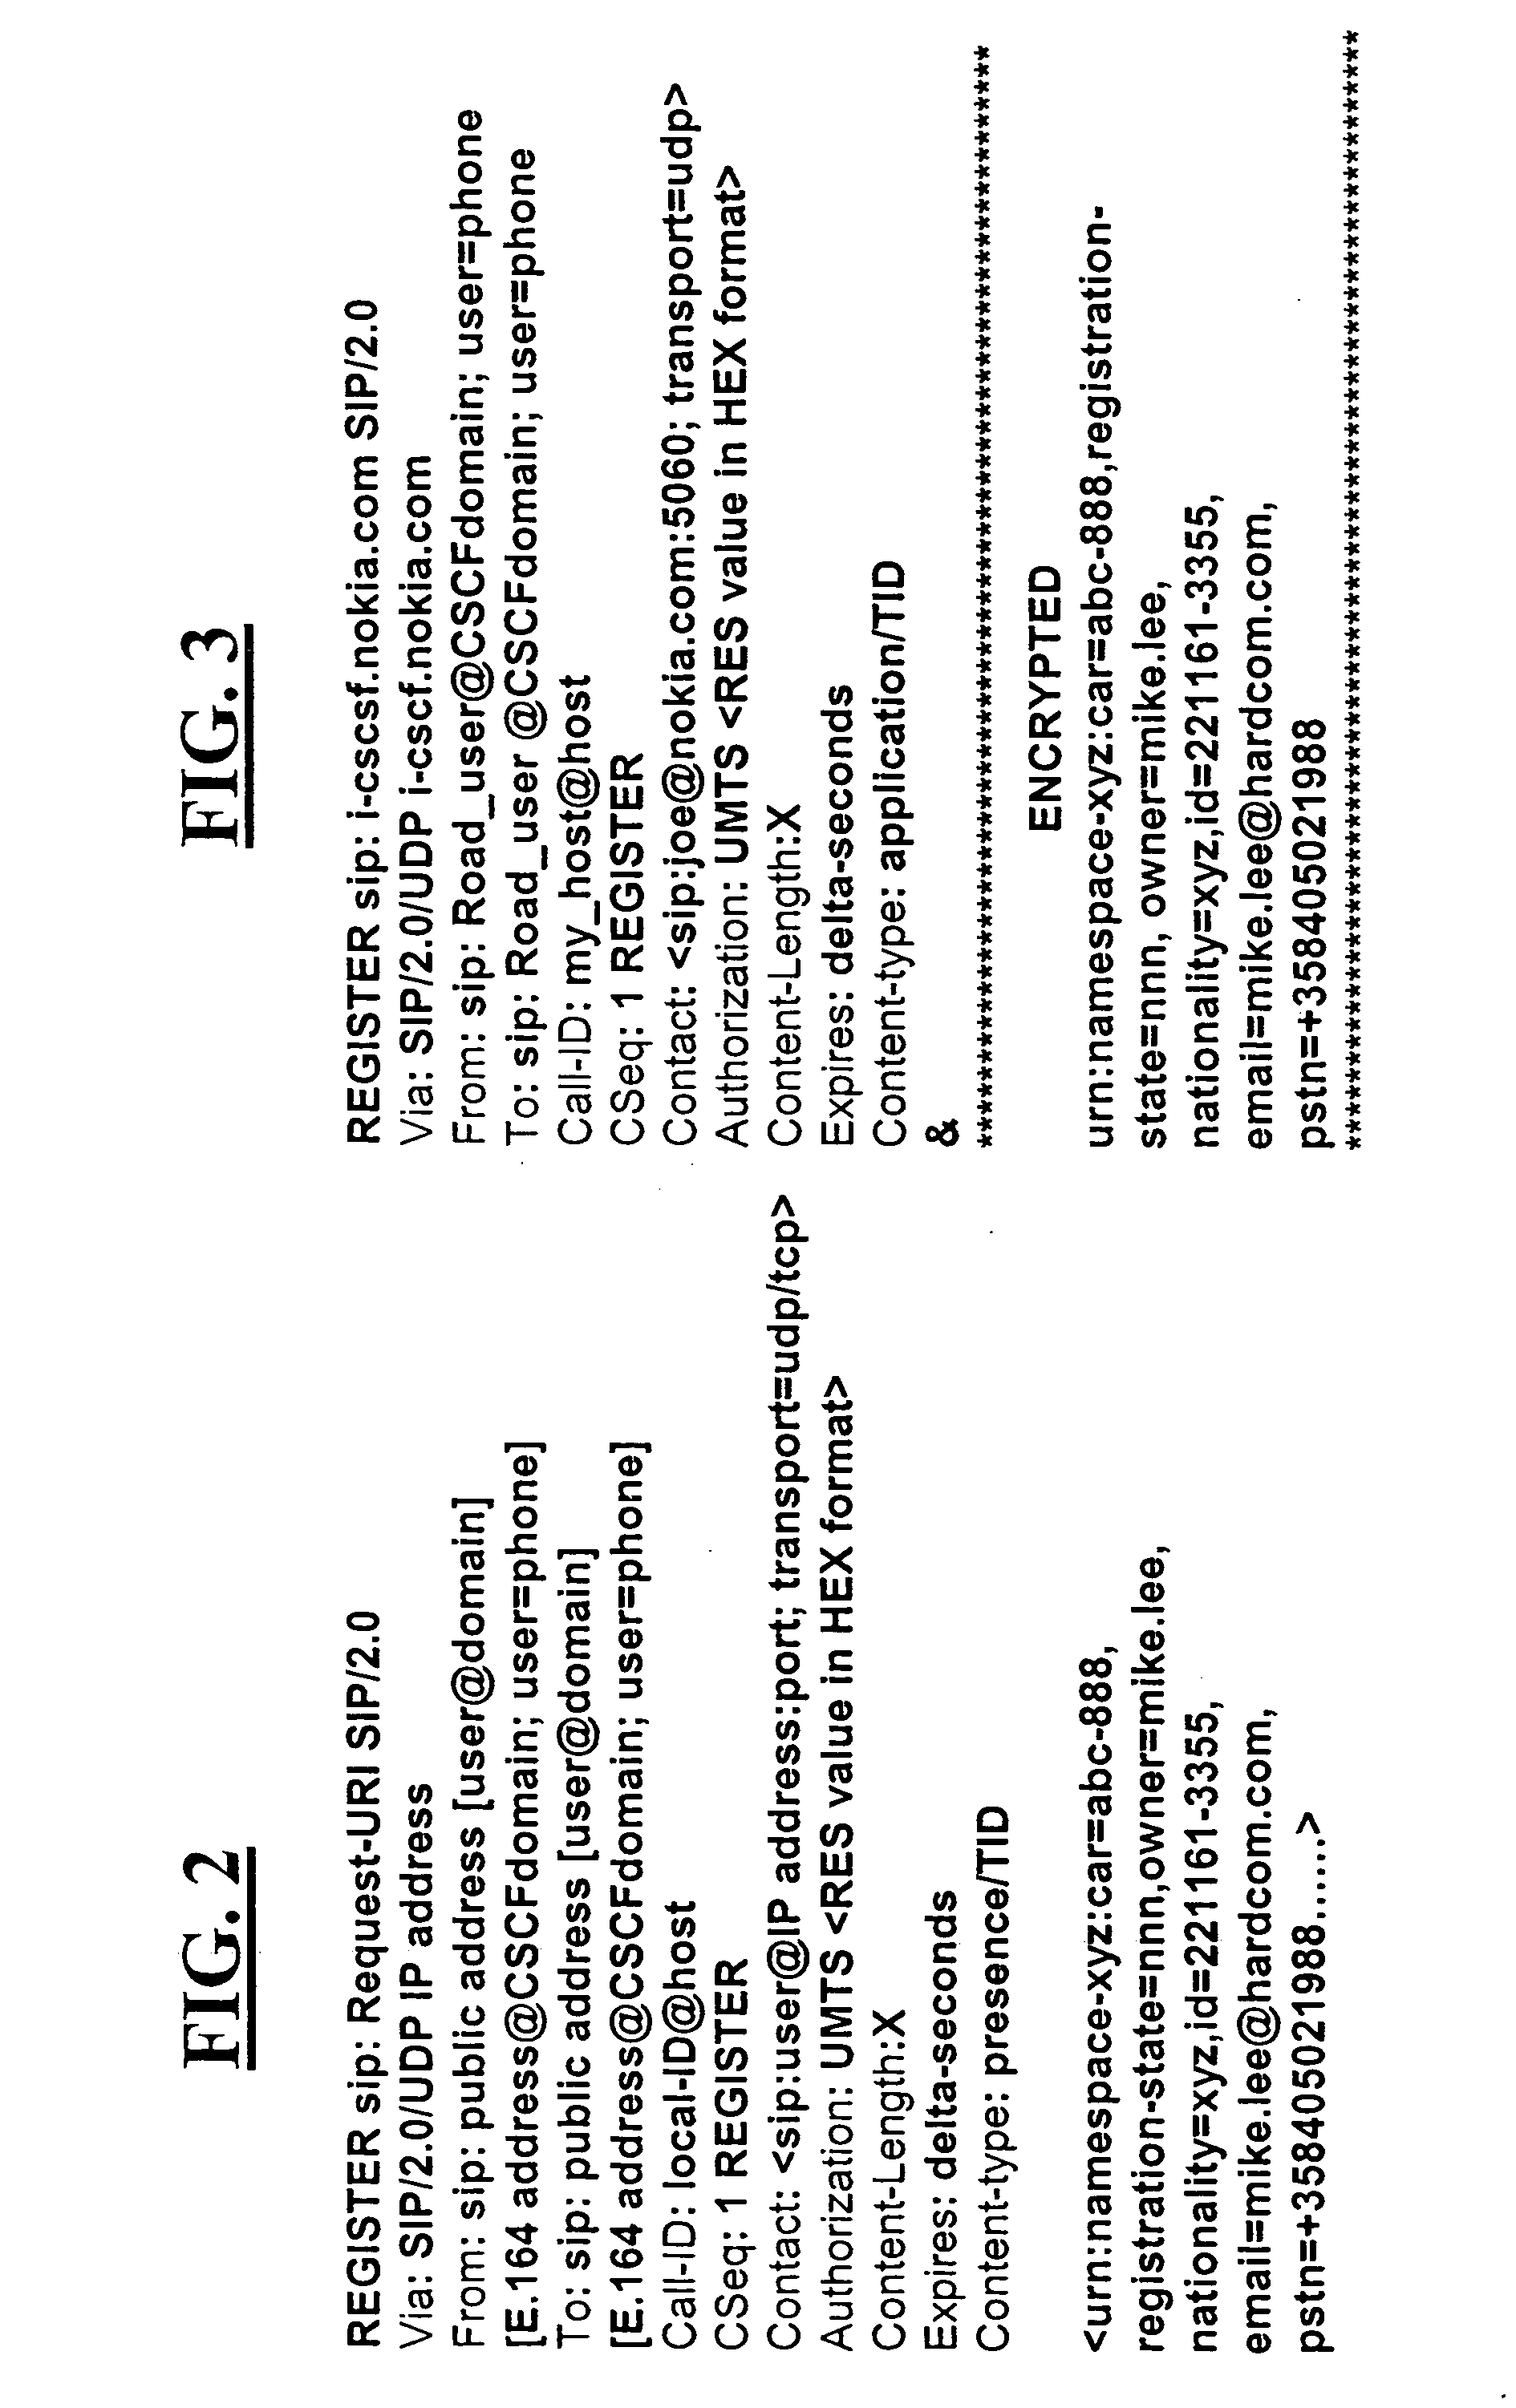 System and methods for using an application layer control protocol transporting spatial location information pertaining to devices connected to wired and wireless Internet protocol networks